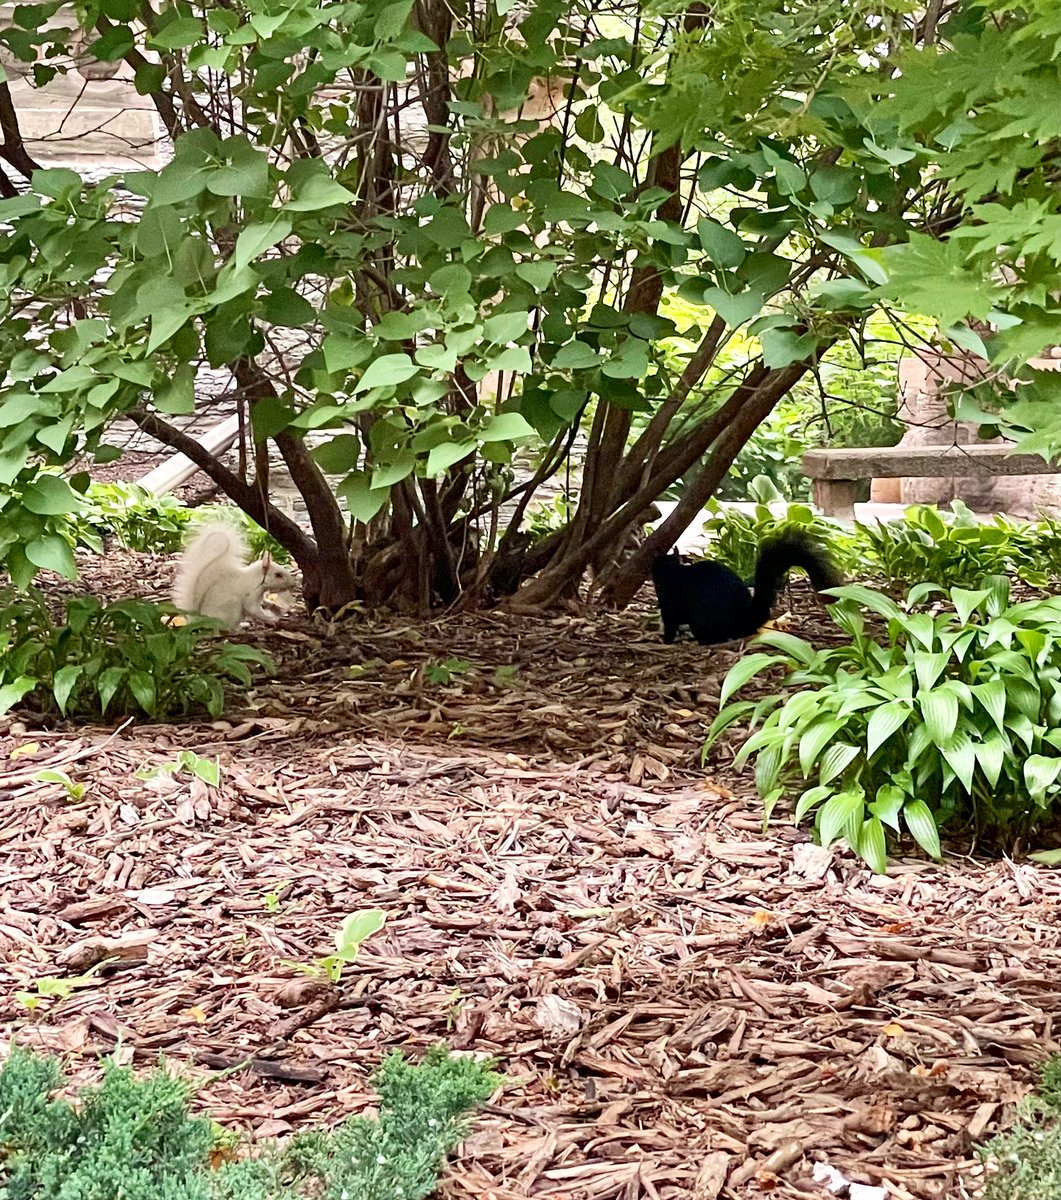 #heymac Found this albino grey squirrel in a deep conversation with a melanistic morph at @Macalester campus 🐿️ sorry for the grainy/zoomed pic, didn’t want to disturb their meeting 😃#AcademicChatter #blackandwhite #CampusSquirrels